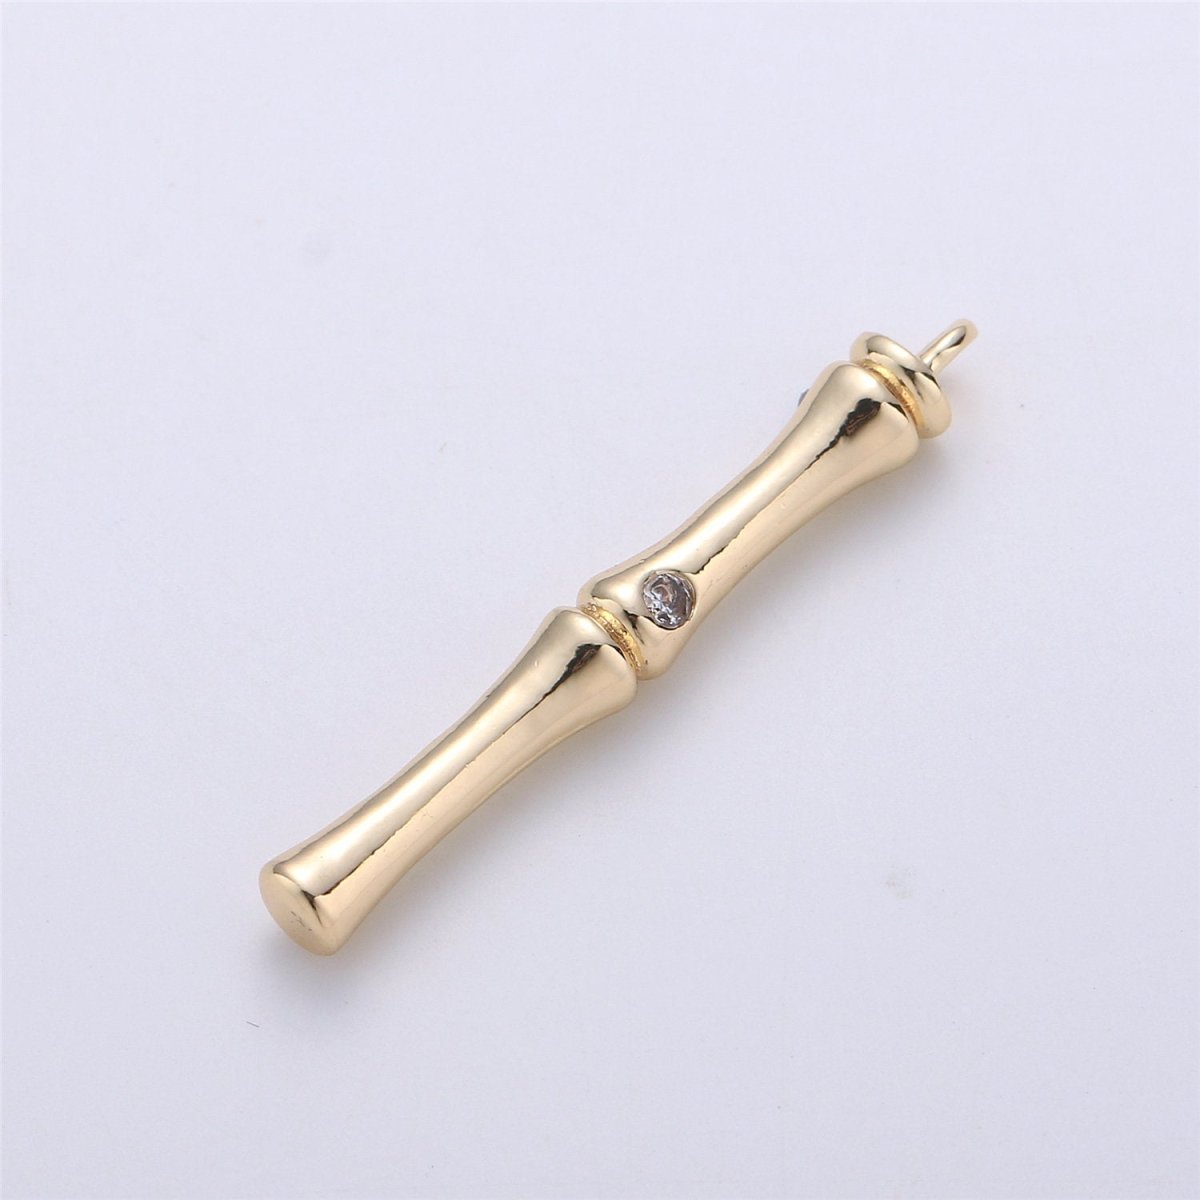 24k Gold Filled Long Tube Charms 30mm Stick Bar Pendant with CZ for Necklace Earring Charm Jewelry Making SupplyC-622 - DLUXCA